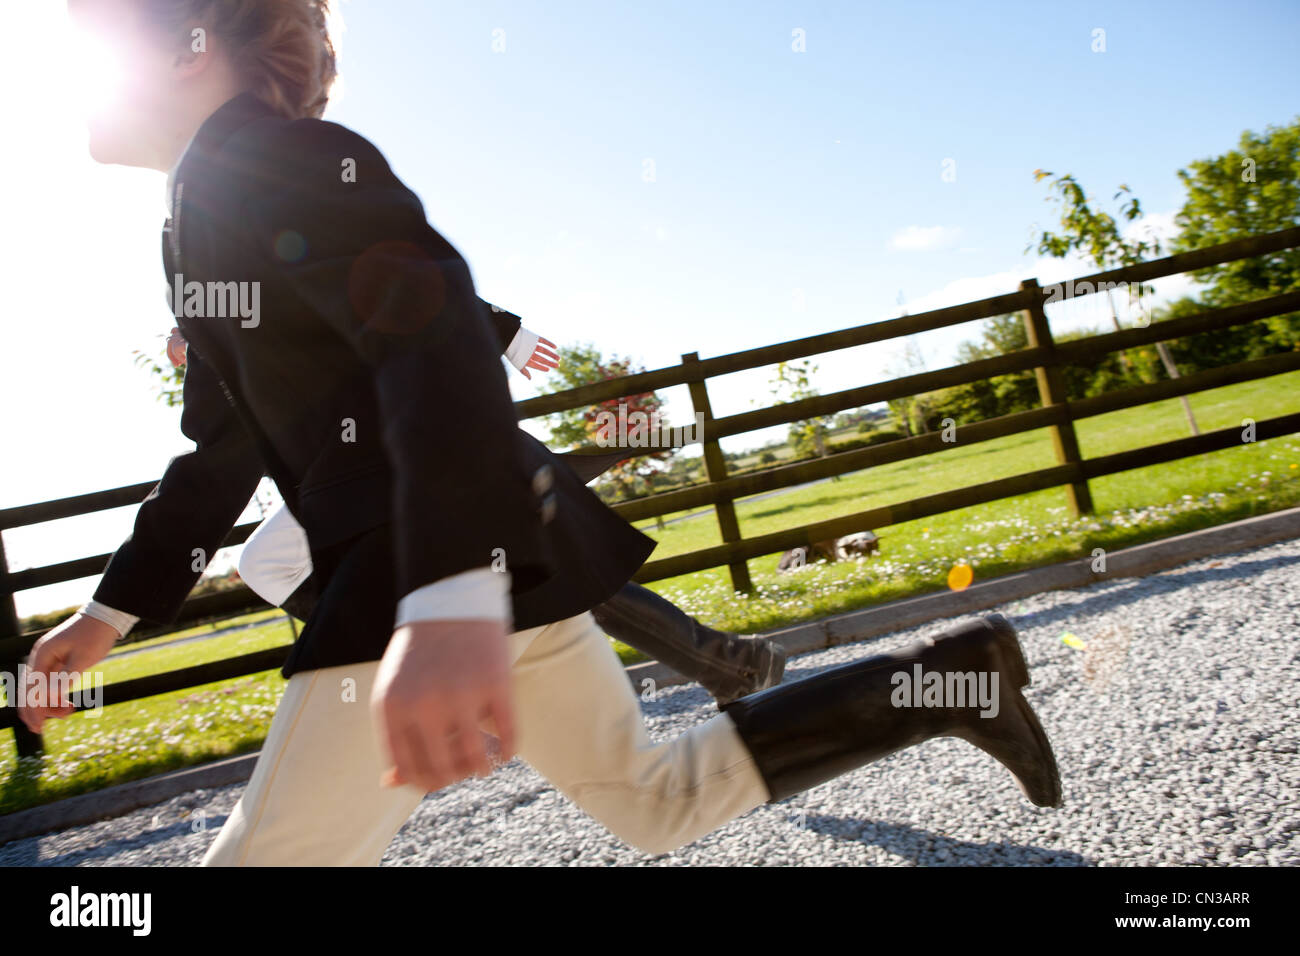 Boys running in horse riding clothes Stock Photo